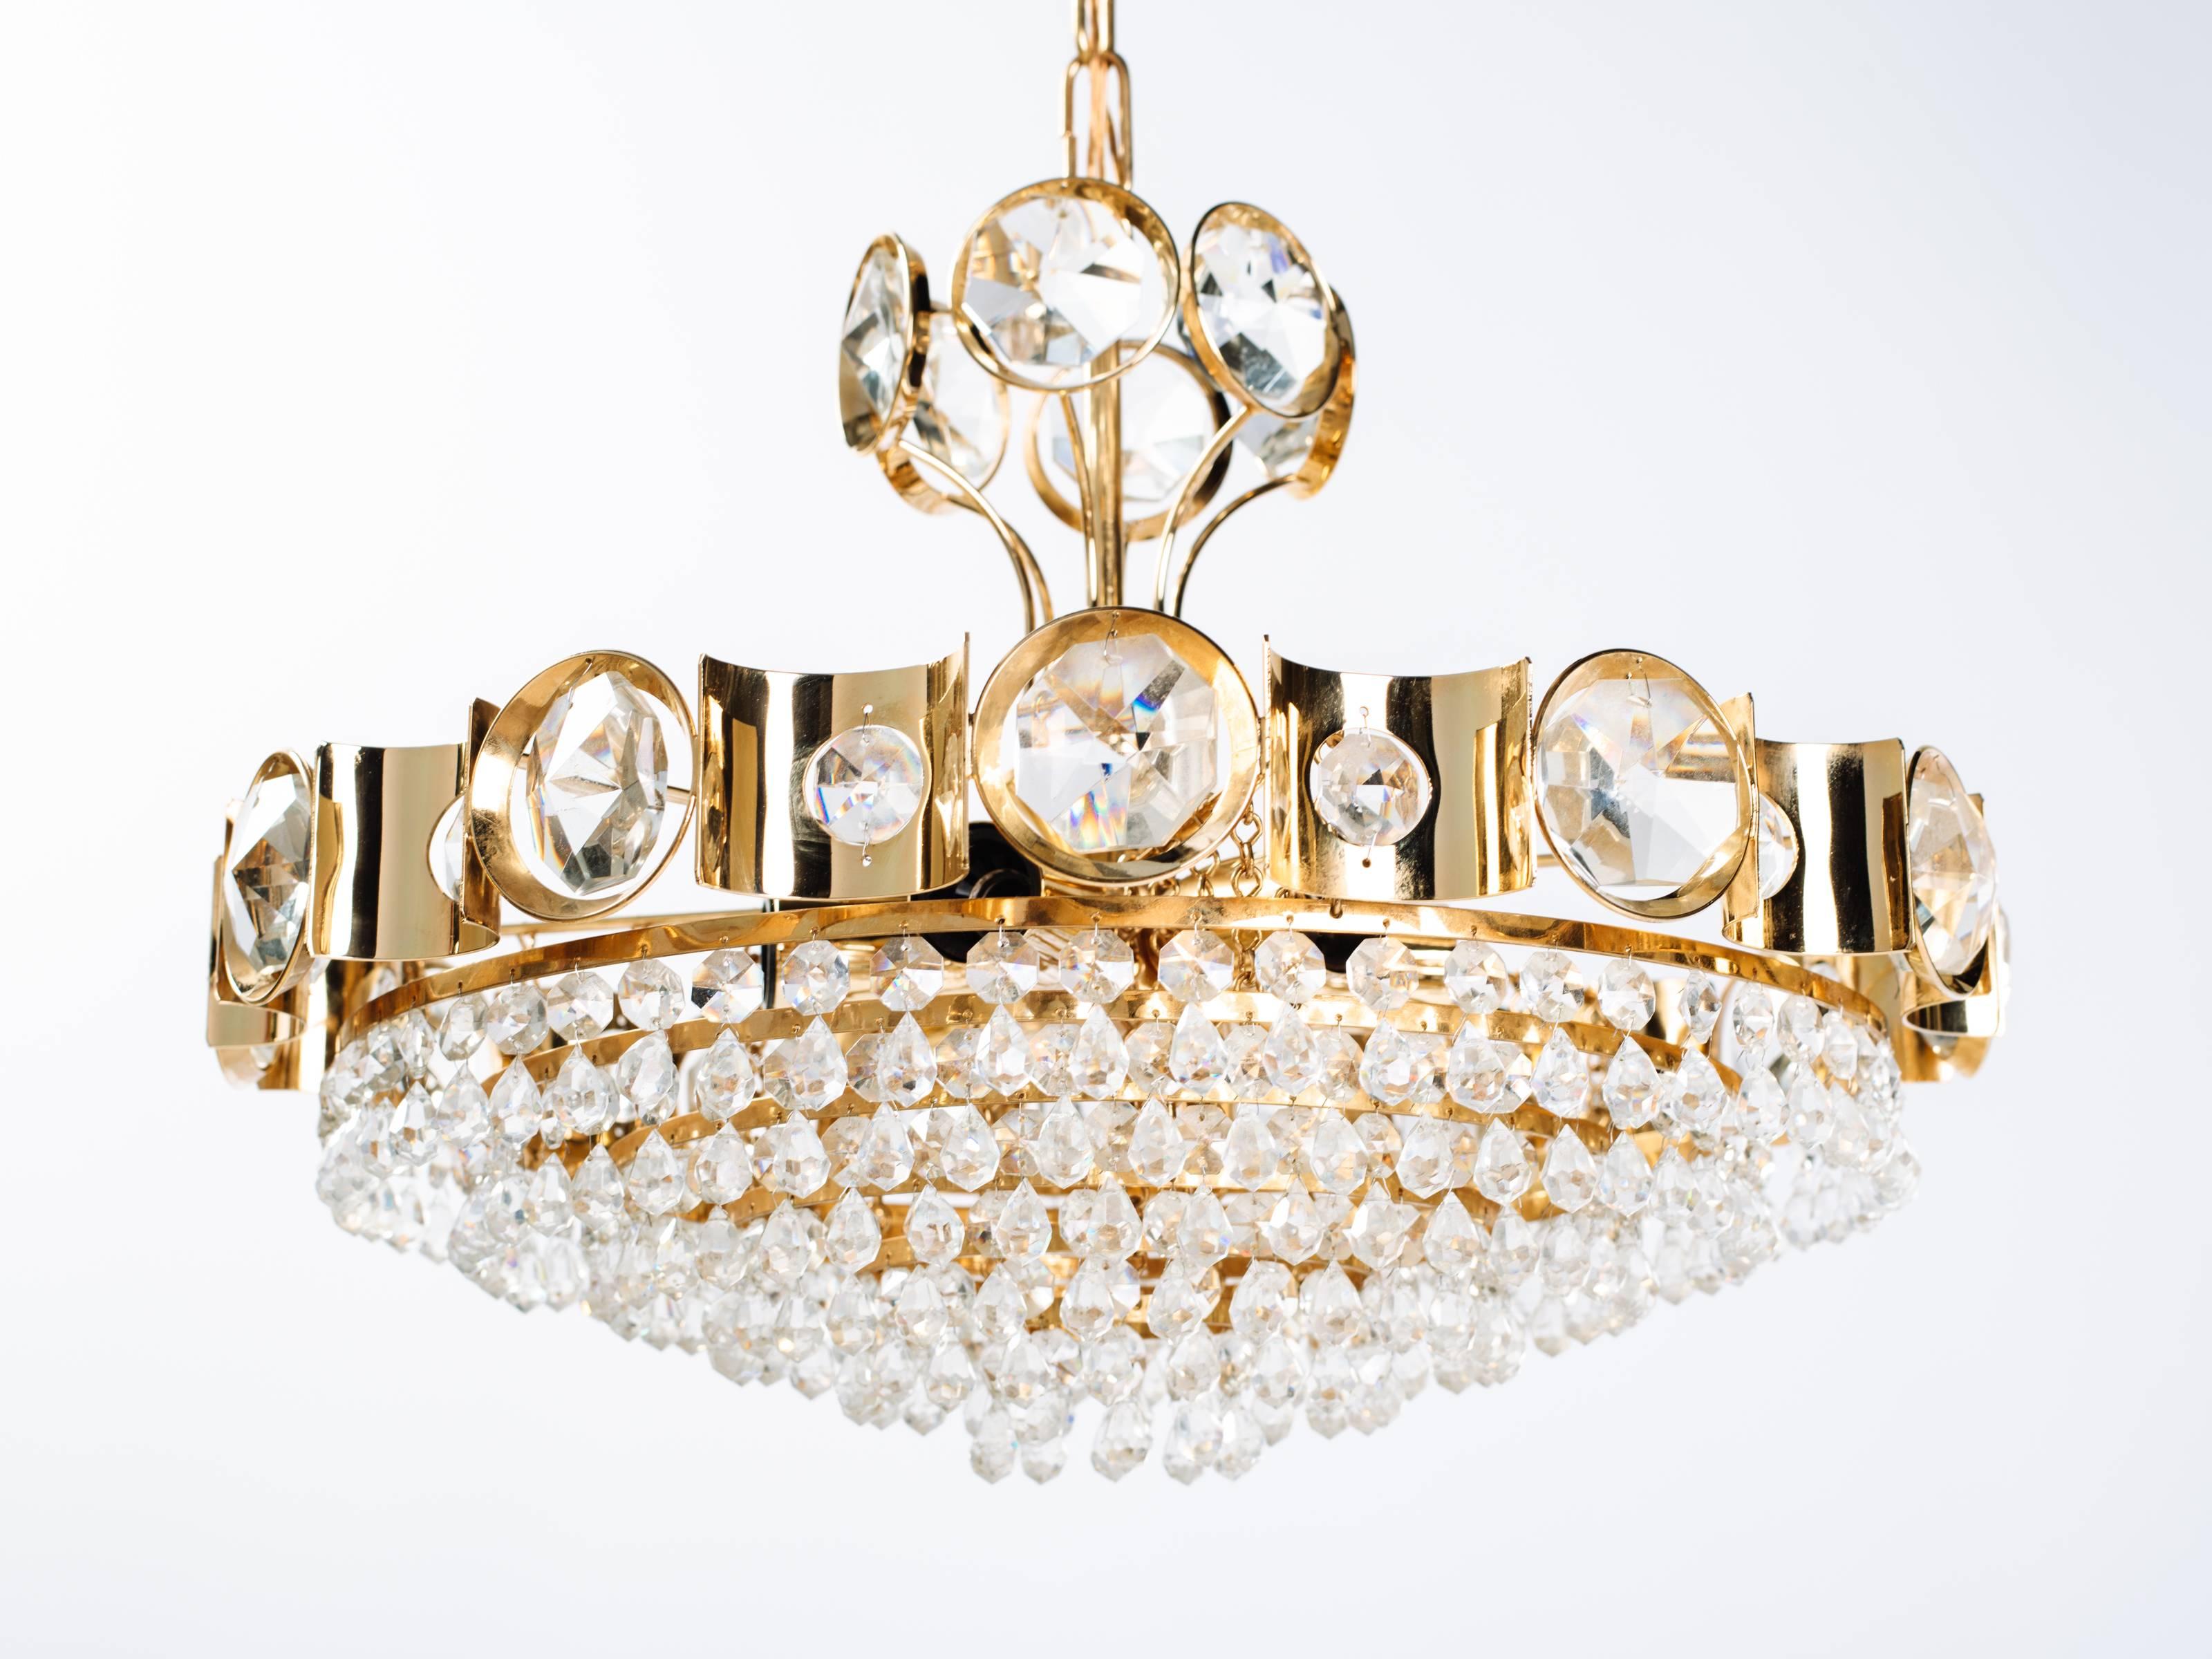 Hand-Crafted Mid-Century Modern Jeweled Cut Crystal and Gold Chandelier by Lobmeyr